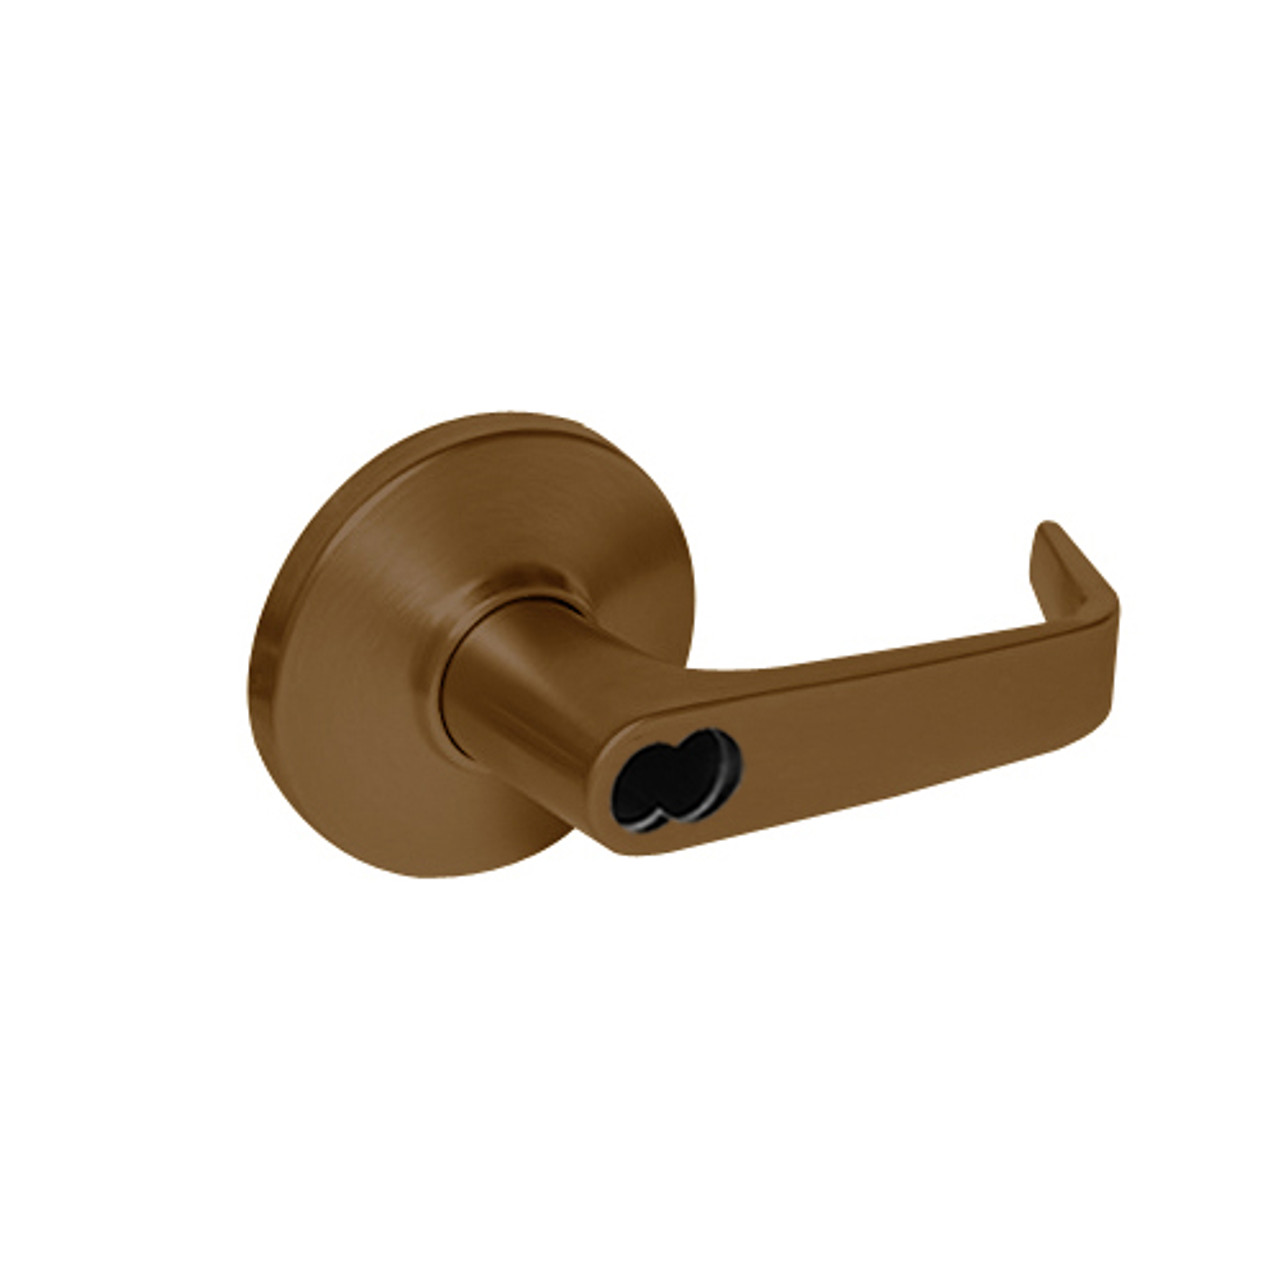 9K37YR15DS3690 Best 9K Series Special Function Cylindrical Lever Locks with Contour Angle with Return Lever Design Accept 7 Pin Best Core in Dark Bronze